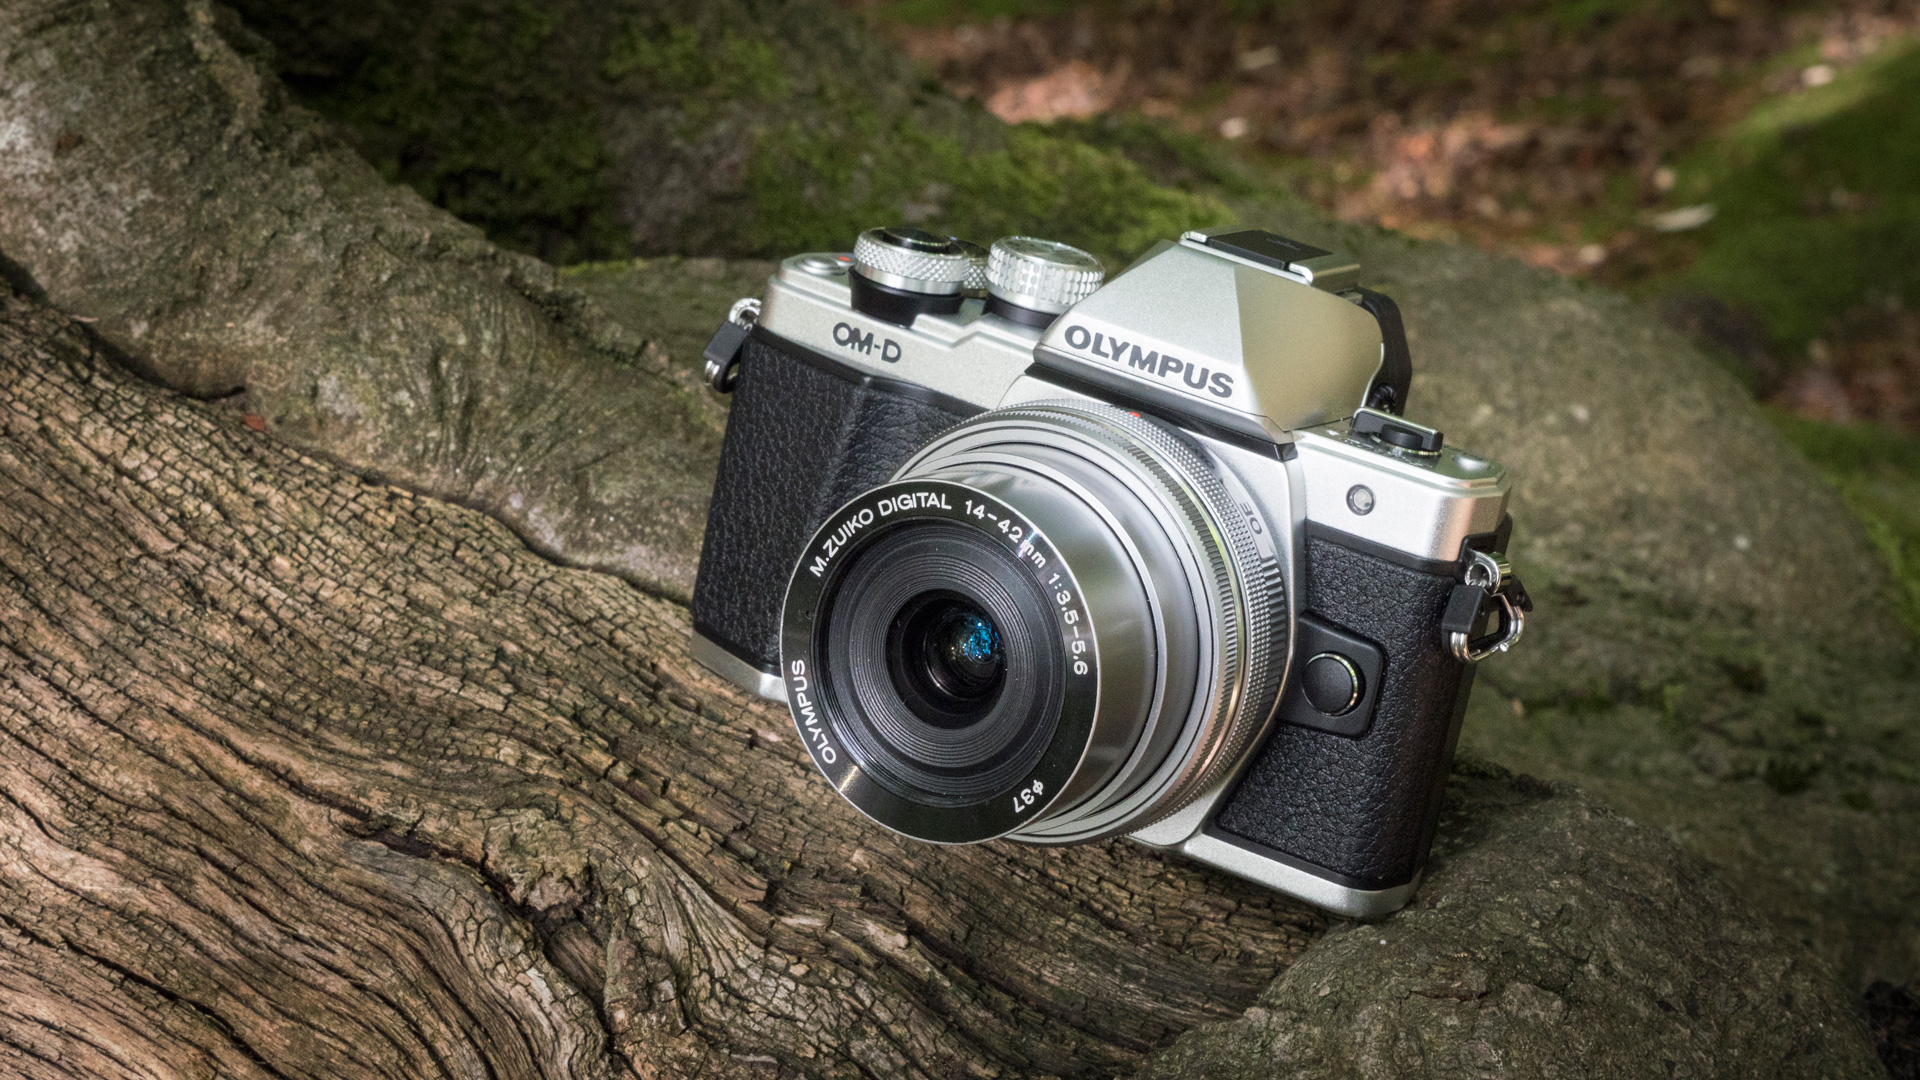 Build and handling - Olympus OM-D E-M10 Mark II review - Page 2